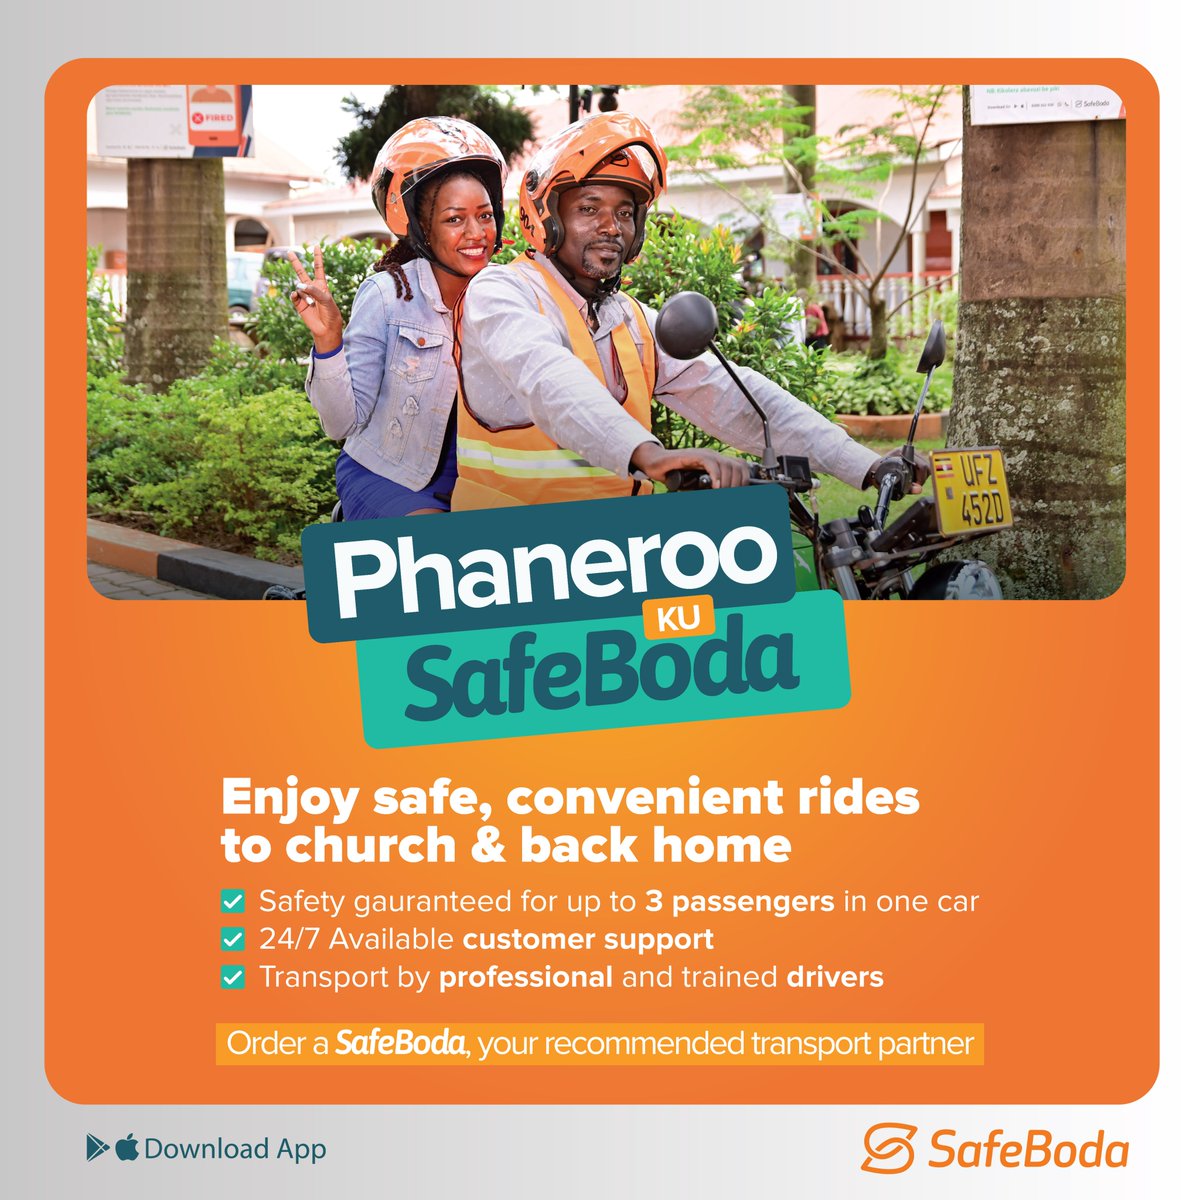 Need a reliable, safe and secure ride to take you to the  
@Phanerookampala fellowship & back home thereafter? Wonder no more! 🙏🏿

Order #SafeCar or #SafeBoda here 👉🏿 bit.ly/sbappdl We got you 💪🏿